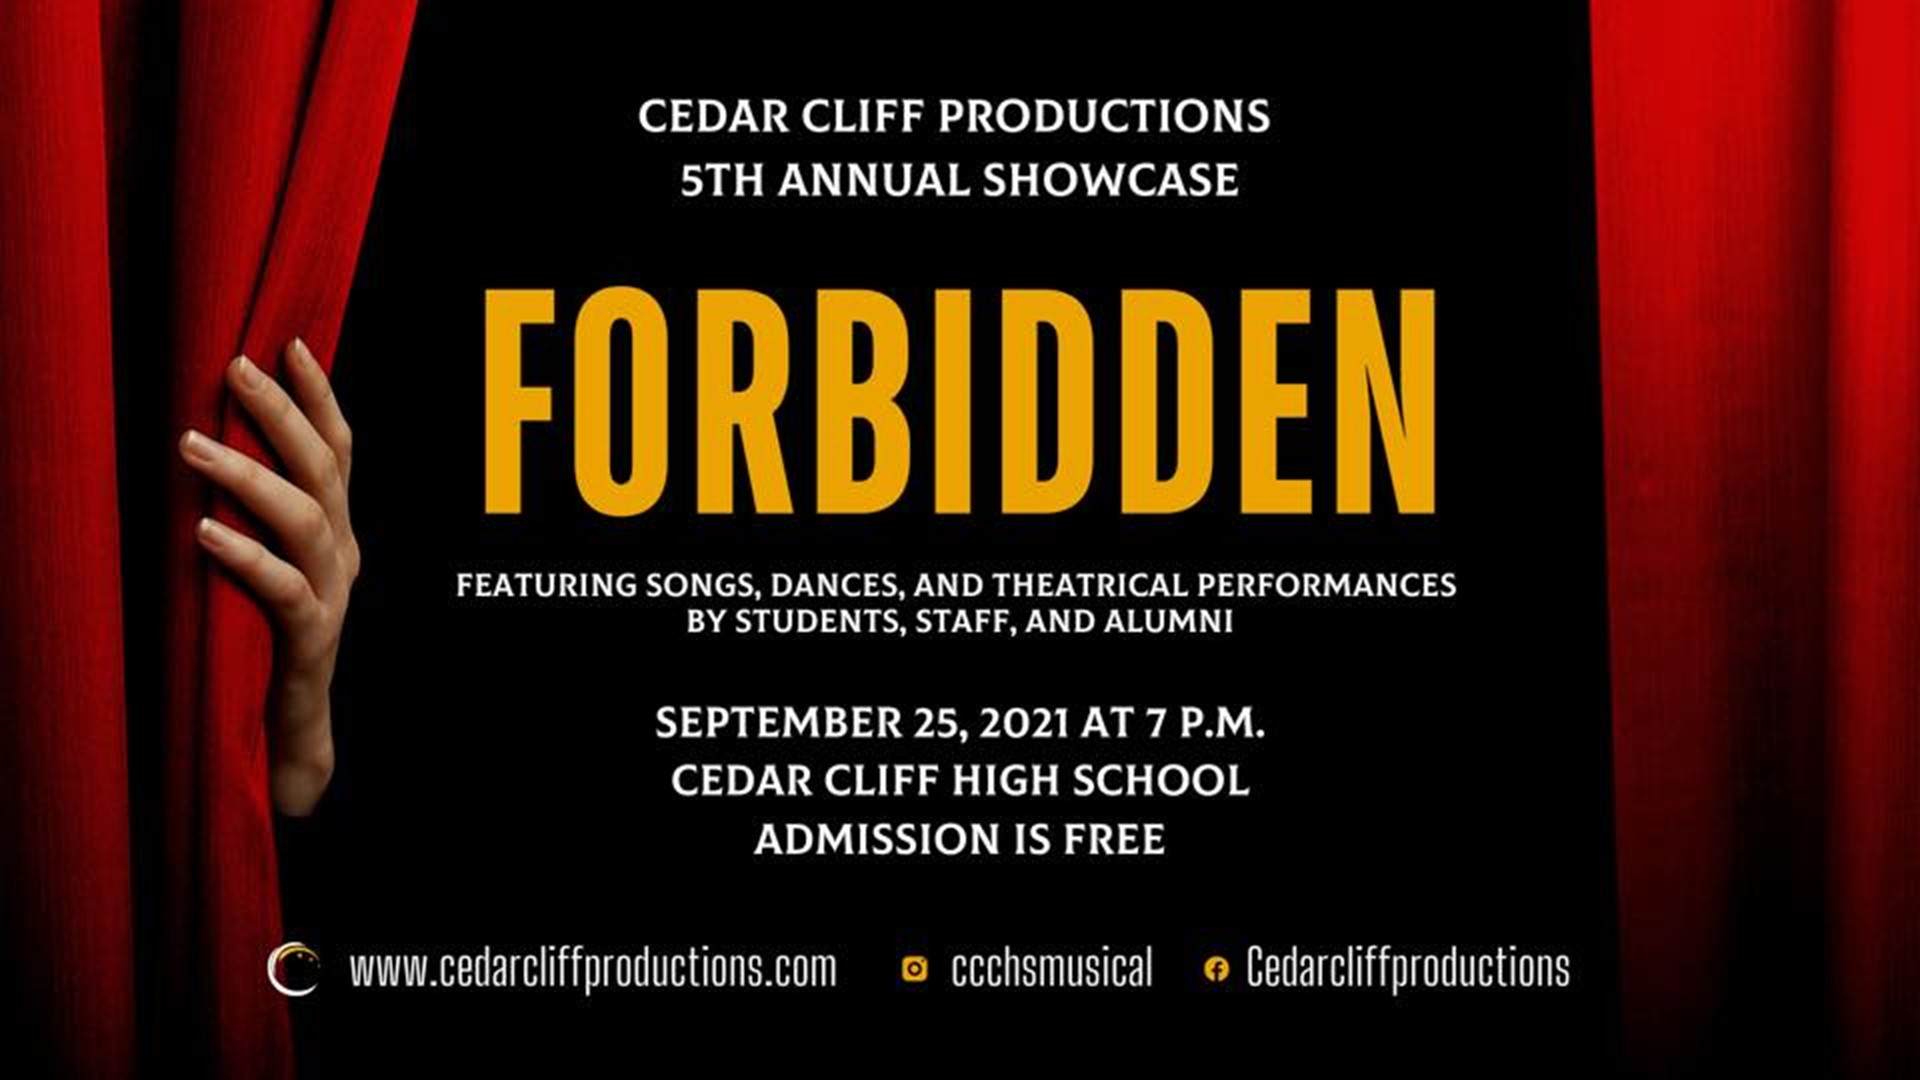 Cedar Cliff Productions will present their annual showcase, Forbidden, inspired by their upcoming 2022 musical.